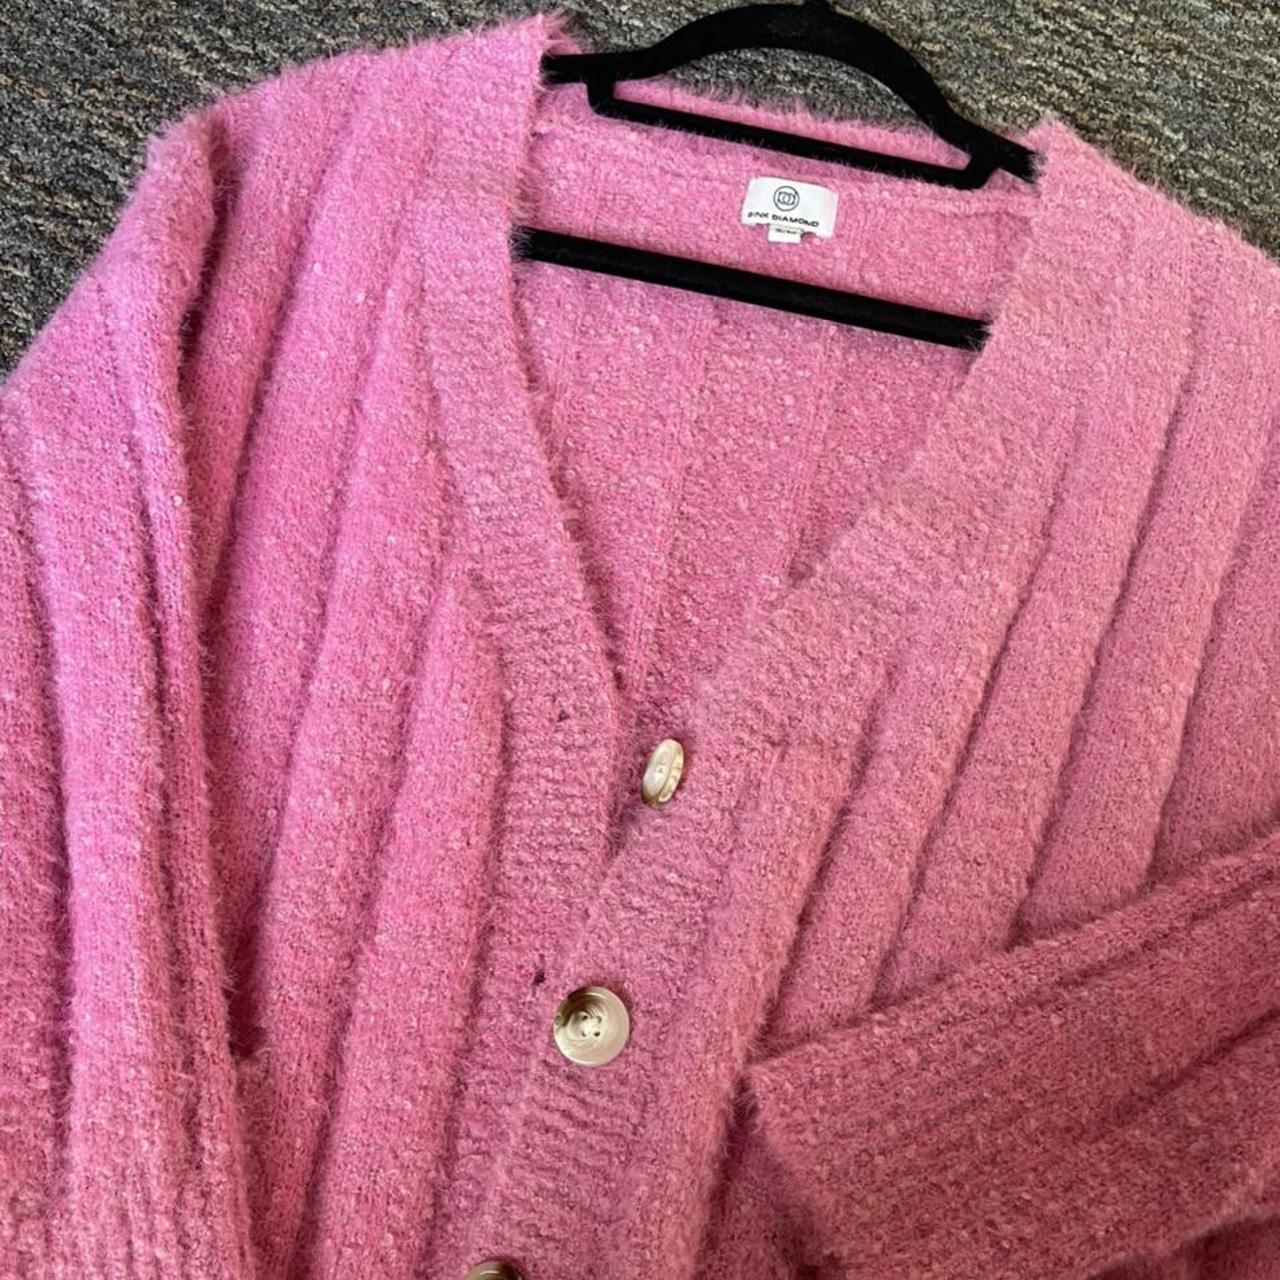 pink button up cardigan sweater that i bought from... - Depop